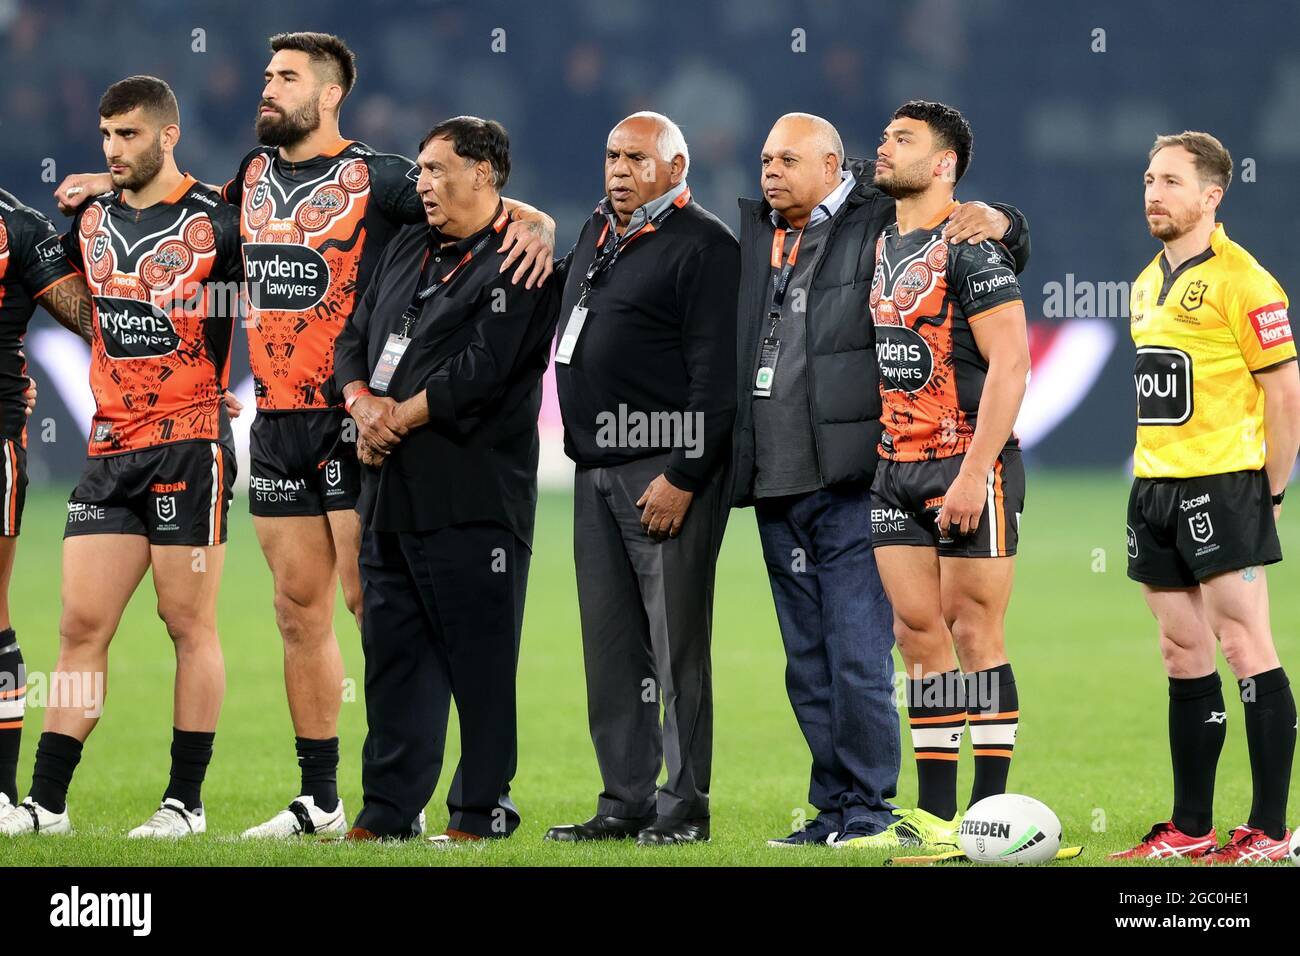 SYDNEY, AUSTRALIA - MAY 28: Larry Corowa former Balmain indigenous legend with Tigers players during the twelve NRL match between the Wests Tigers and St George Illawarra Dragons at Bankwest Stadium